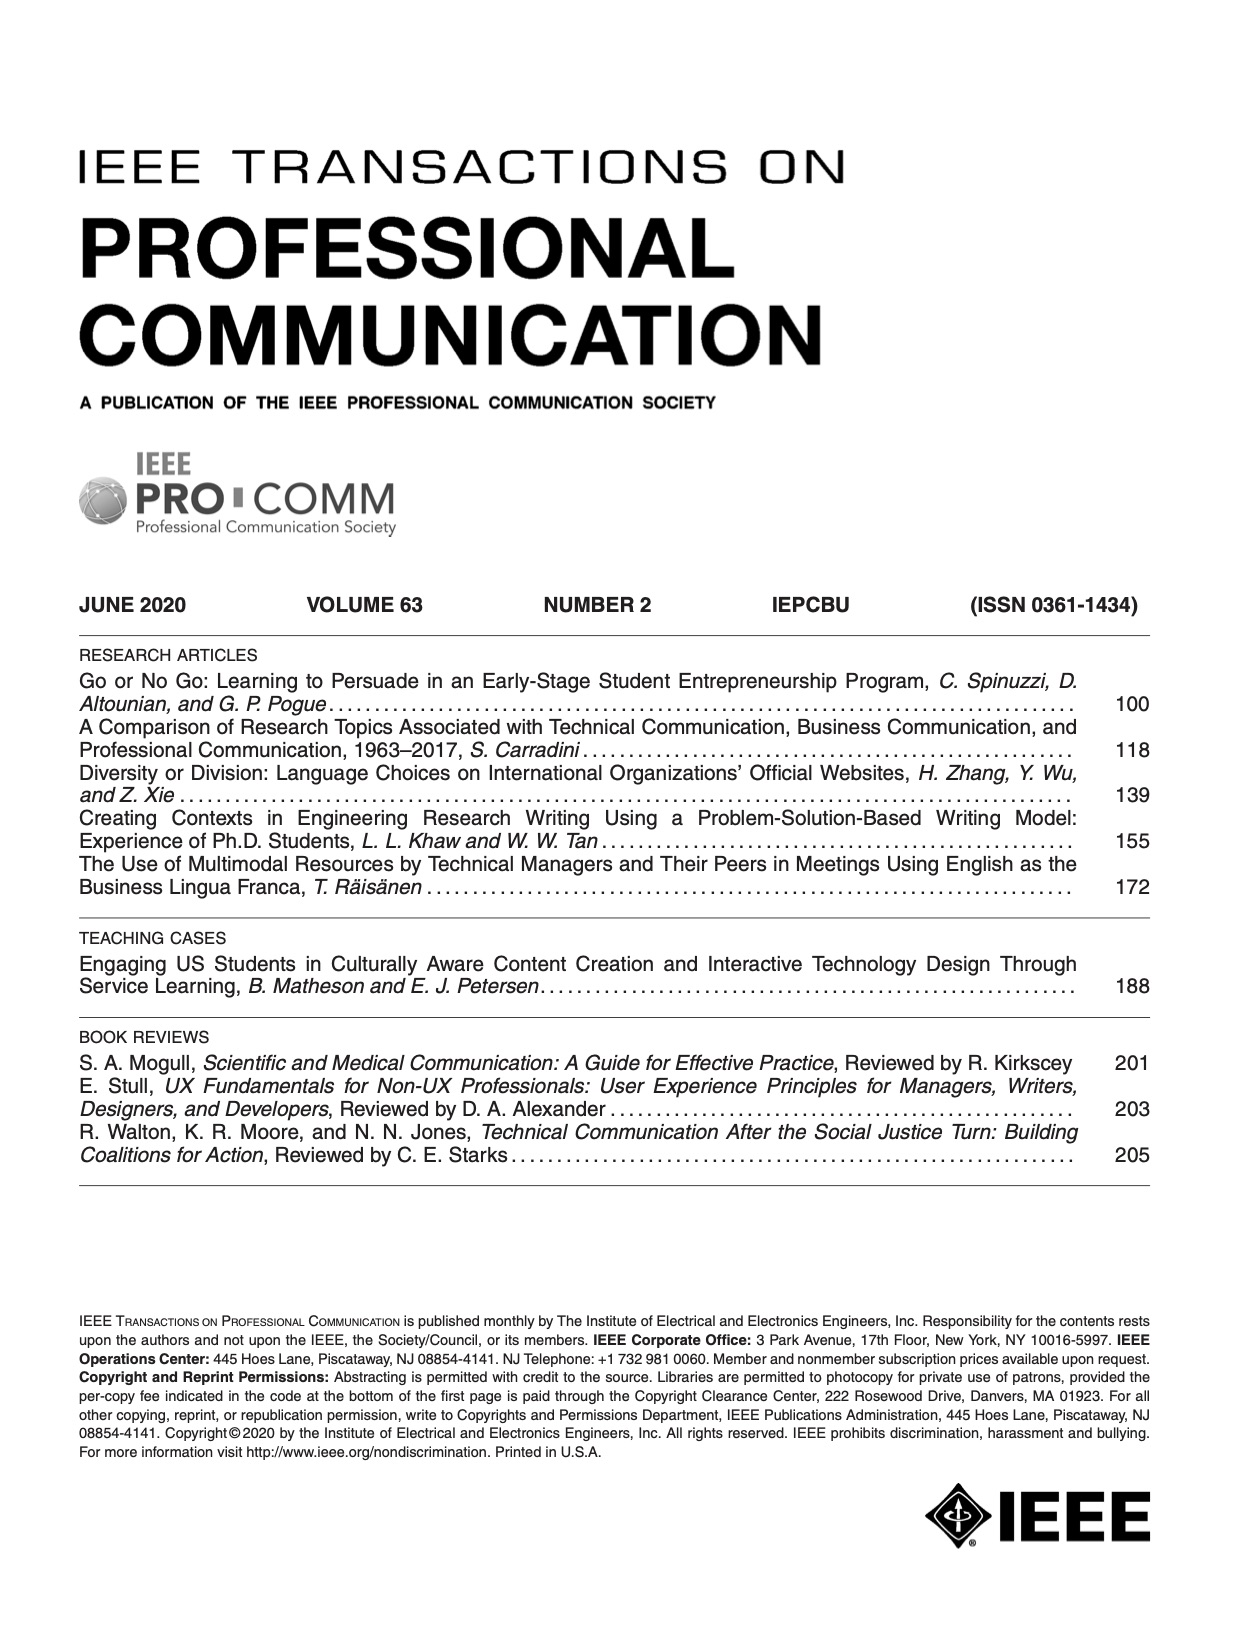 The June 2020 of IEEE Transactions on Professional Communication is Now